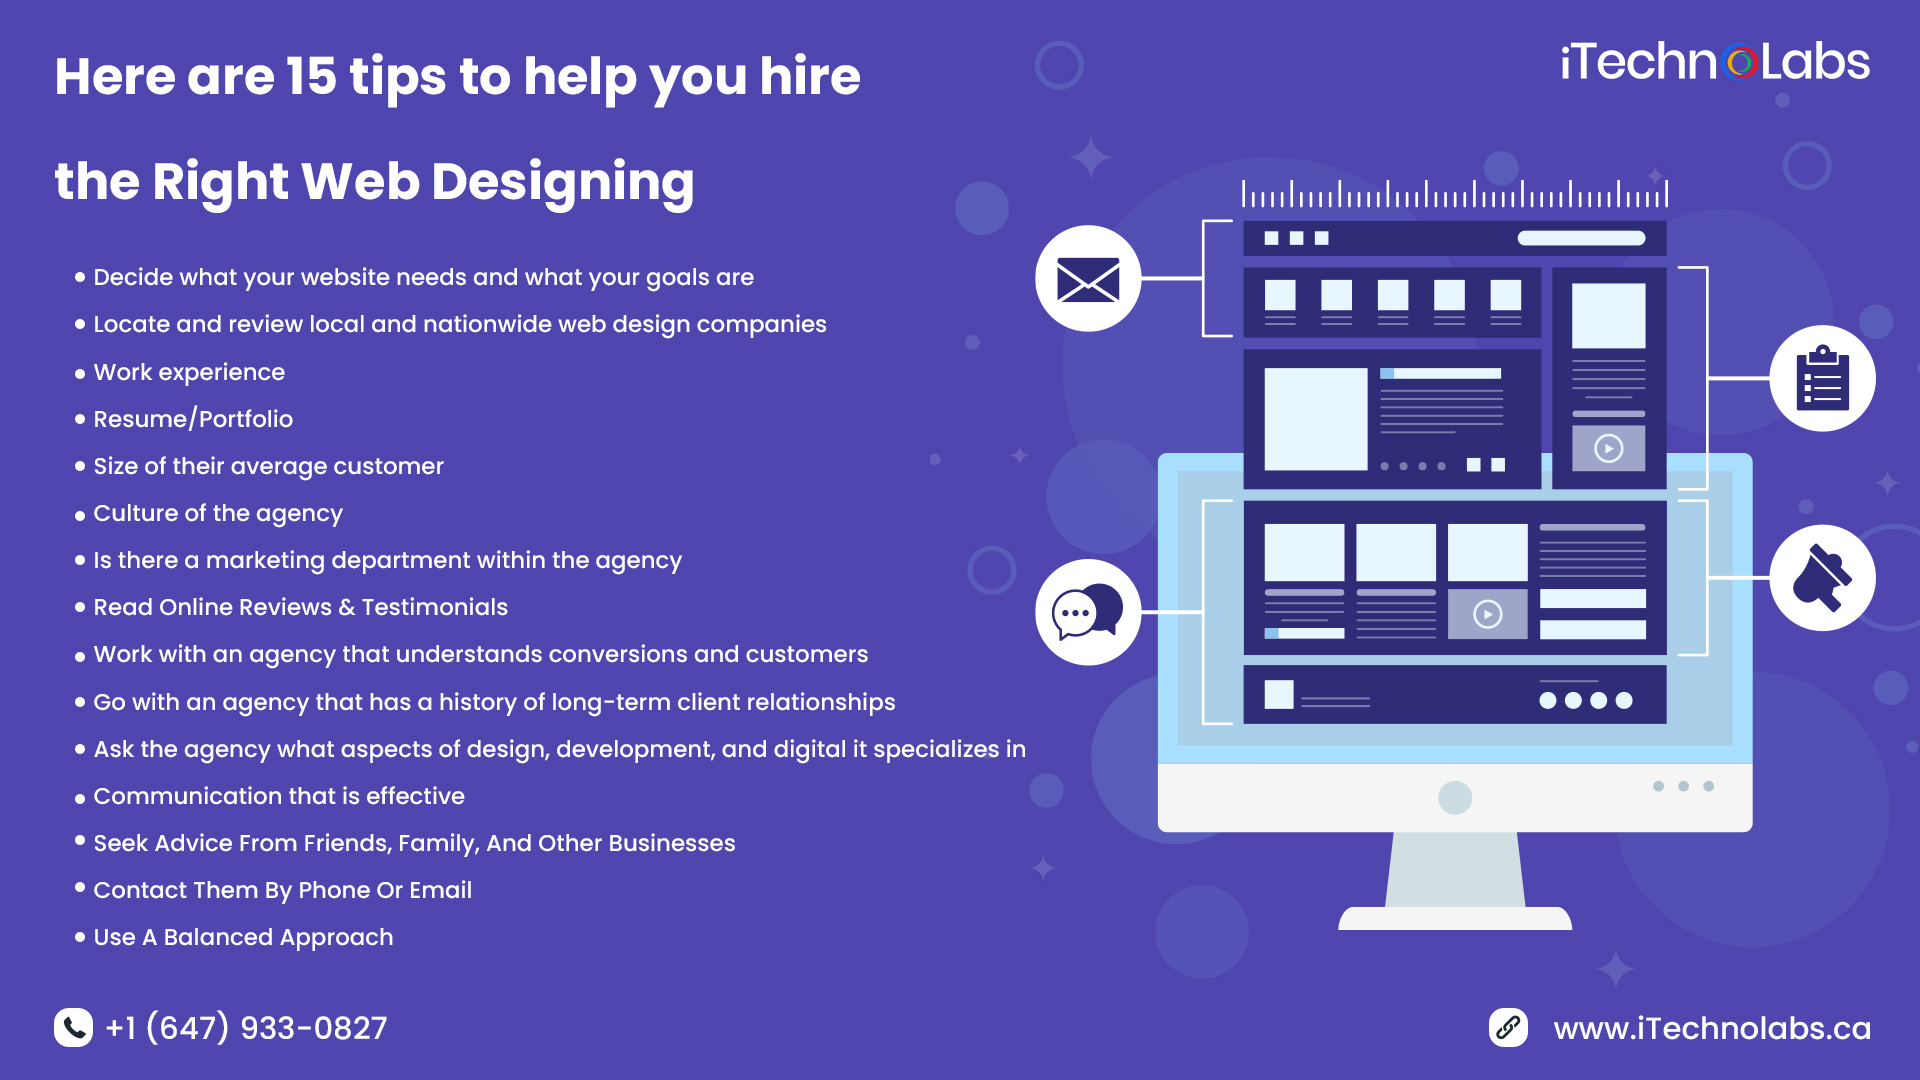 15 tips to help you hire the Right Web Designing Agency itechnolabs